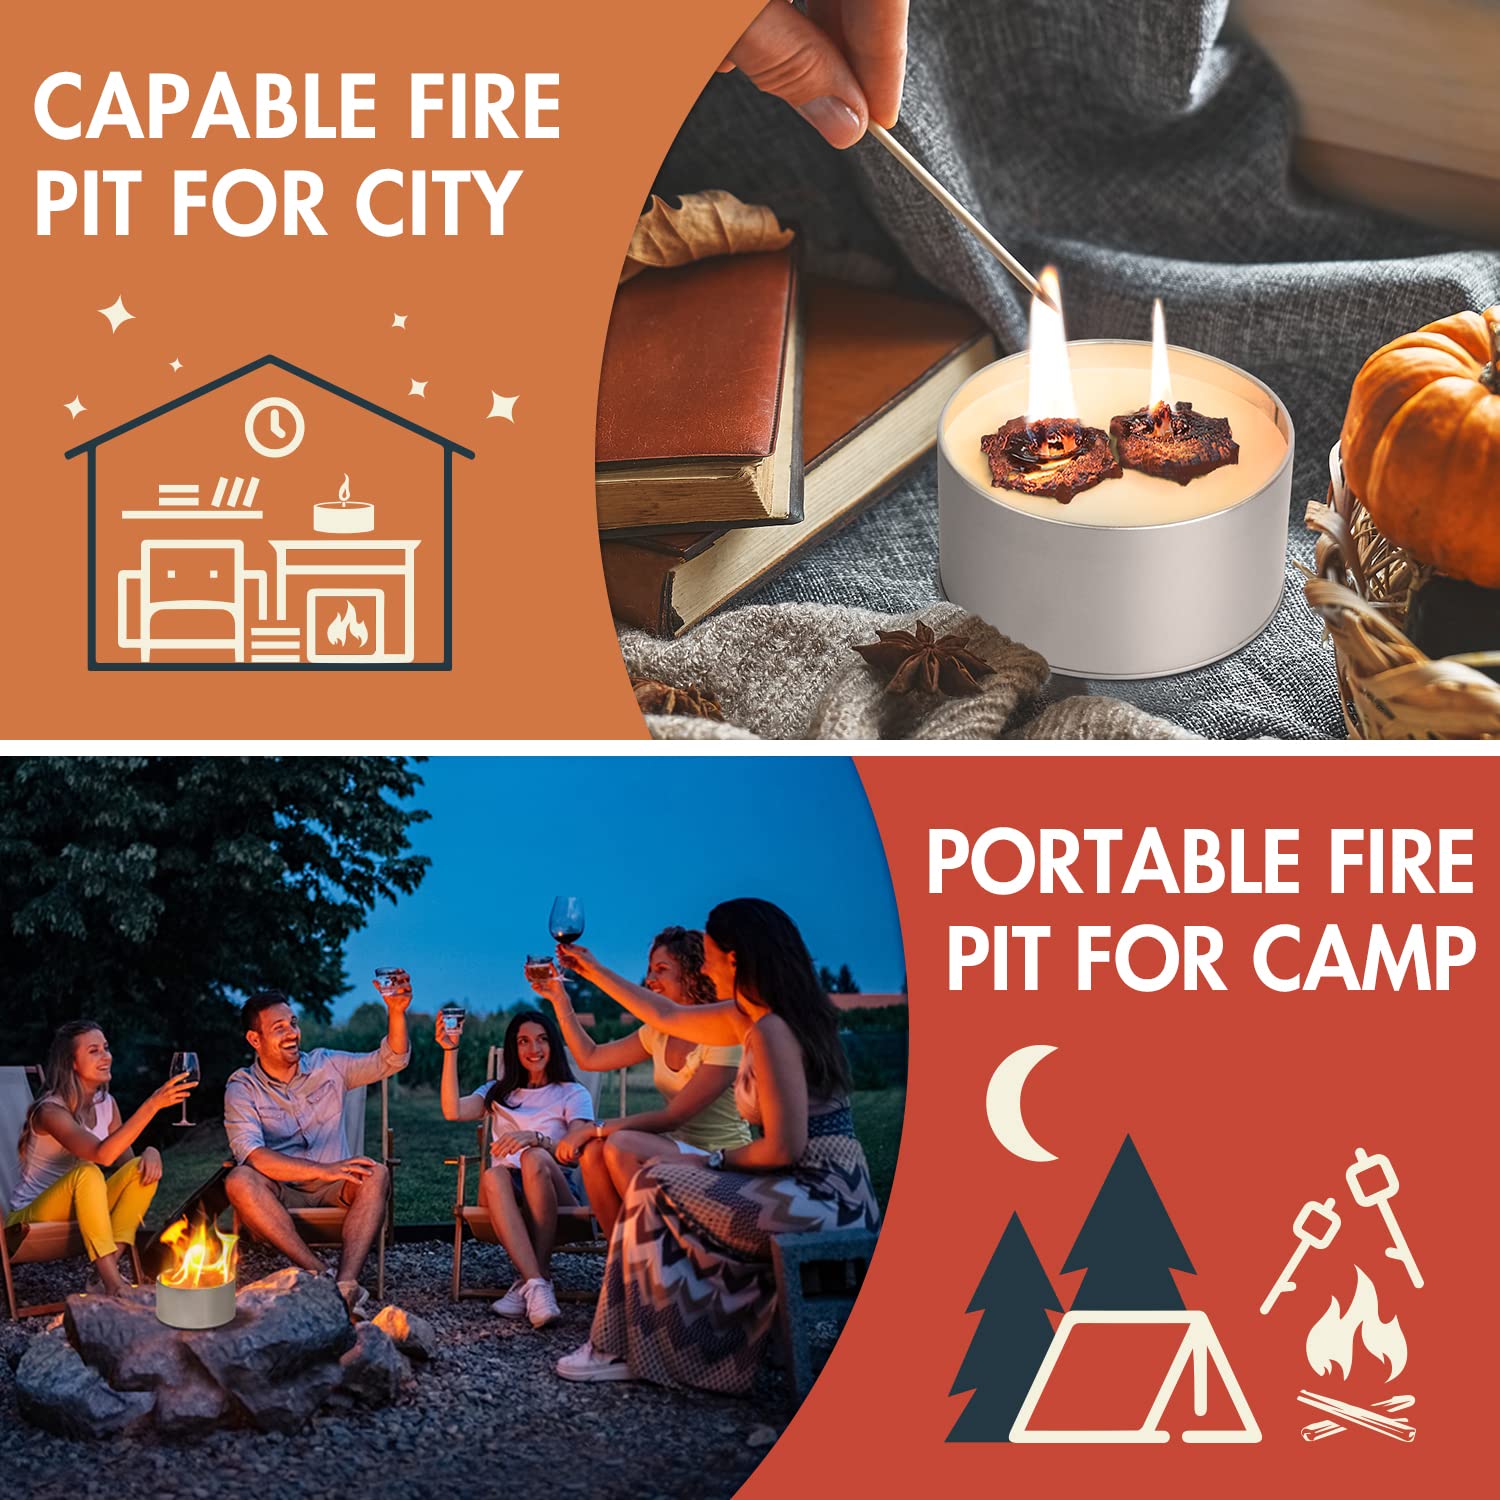 MCleanPin Tabletop Fire Pit for S’Mores,Portable Campfire in A Can,Camping Candles,Mini,Emergcy Heater for Outdoor,3-5 Hours Bonfire Burn Time,No Wood No Embers for Camping Food and Home Indoor